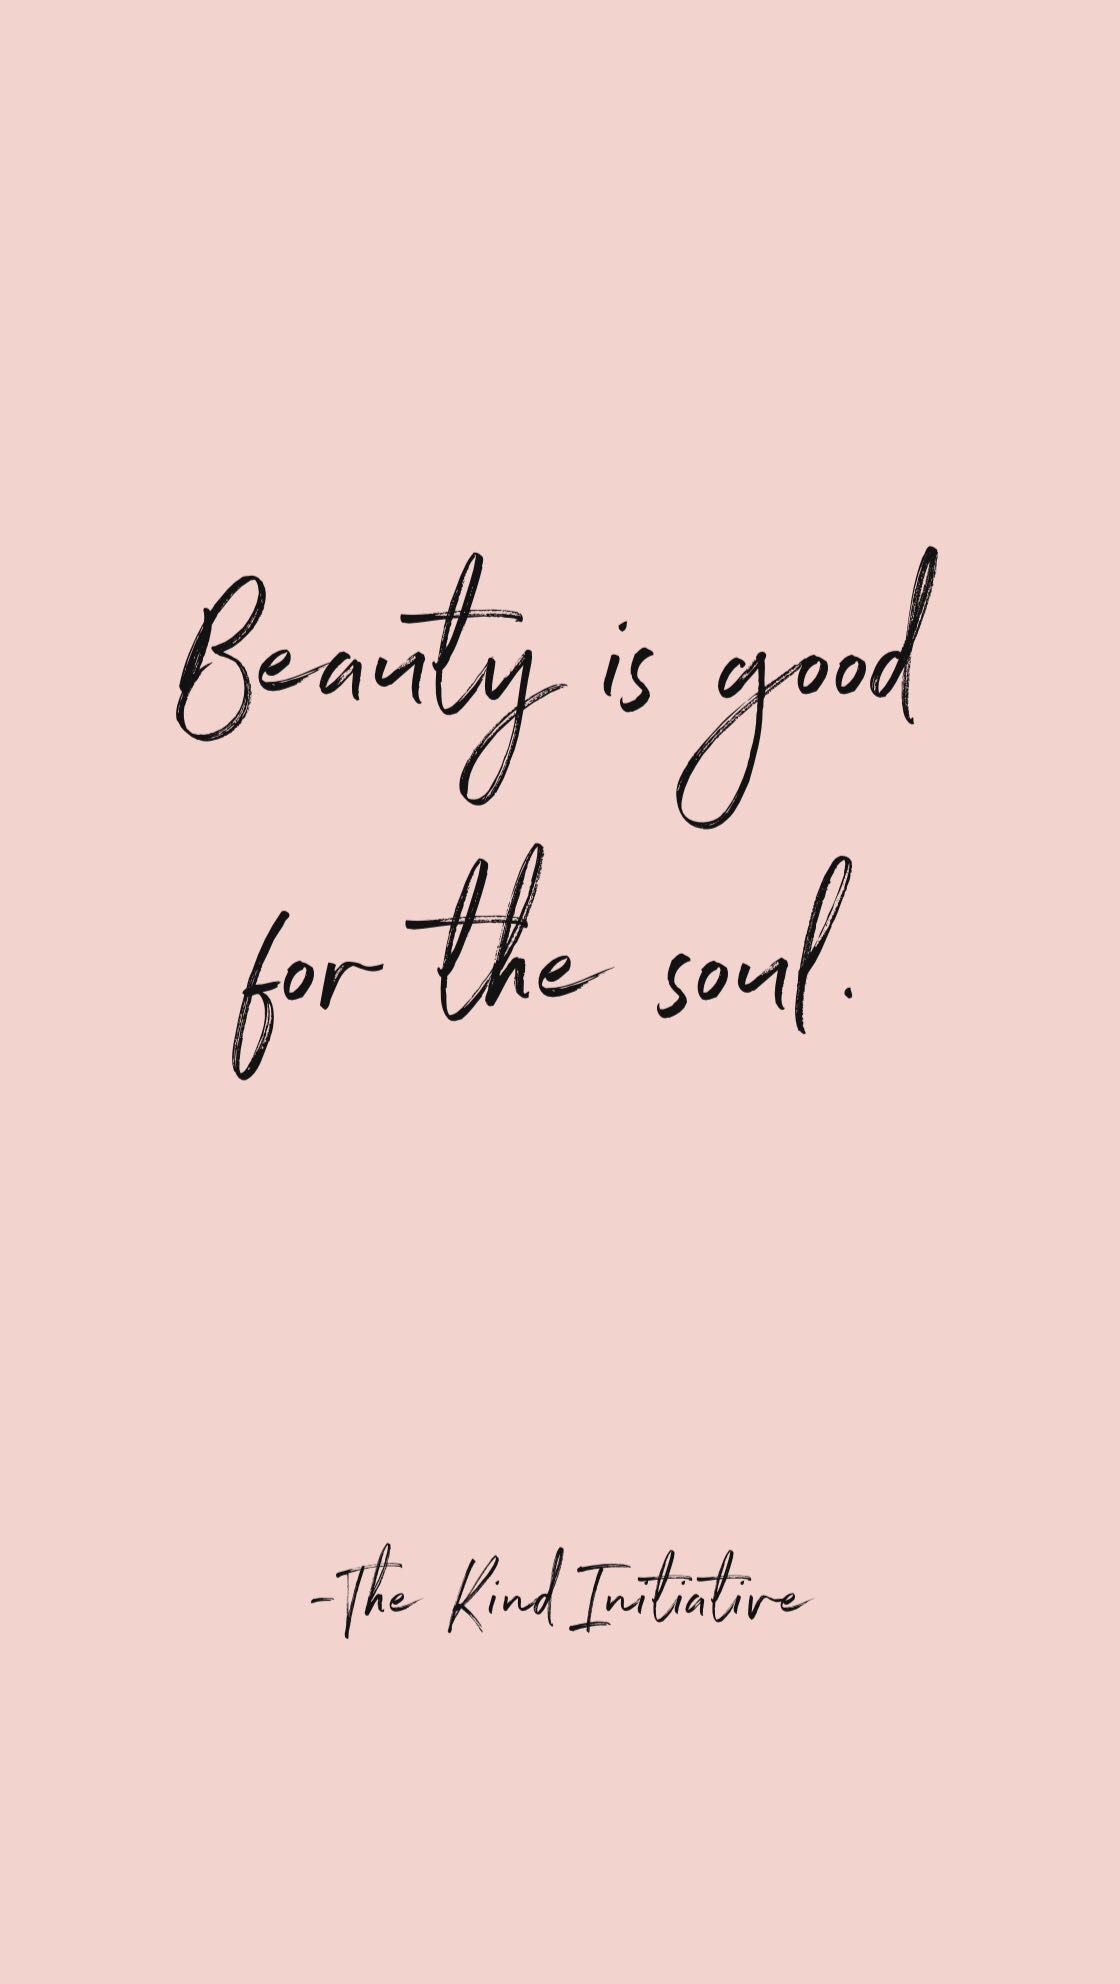 Inspirational Quotes -Inspirational Quotes- Self-Love-Motivation-Truth - Inspirational Quotes -Inspirational Quotes- Self-Love-Motivation-Truth -   18 natural beauty Quotes ideas